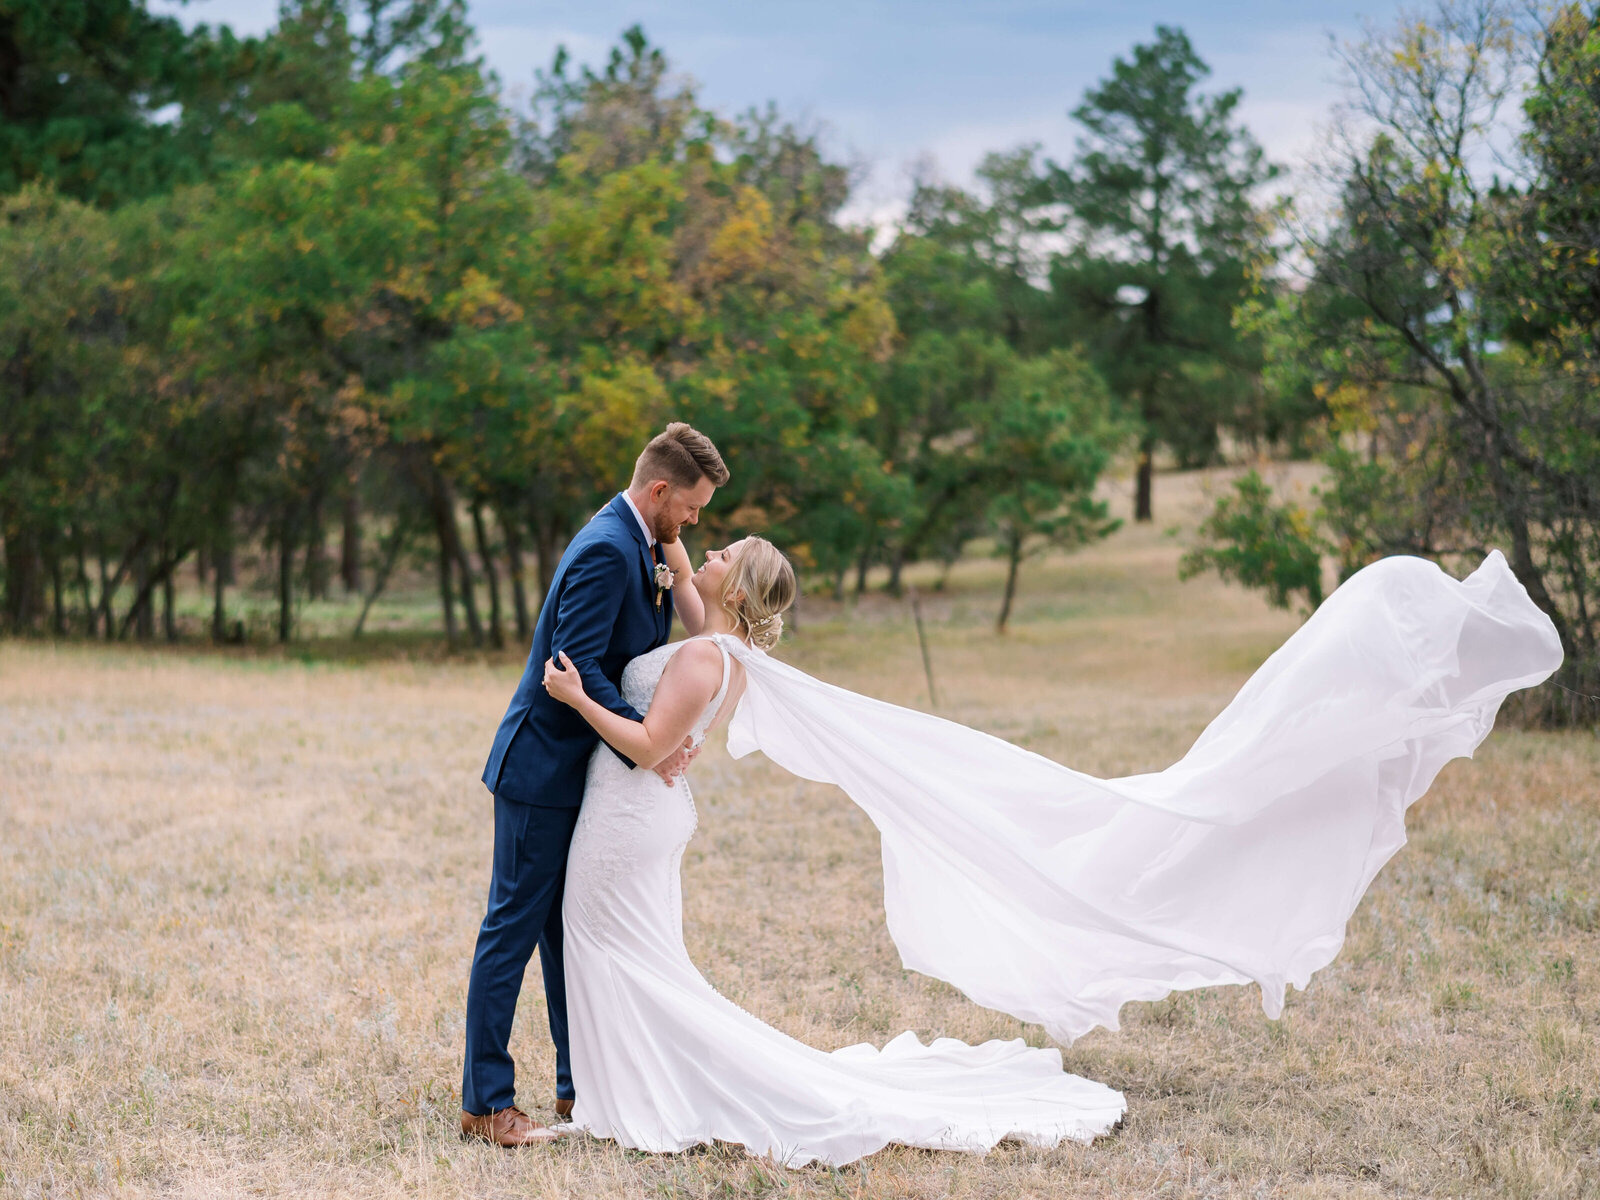 Blonde bride's wedding cape flies in the wind behind her while her new husband dips her before a kiss